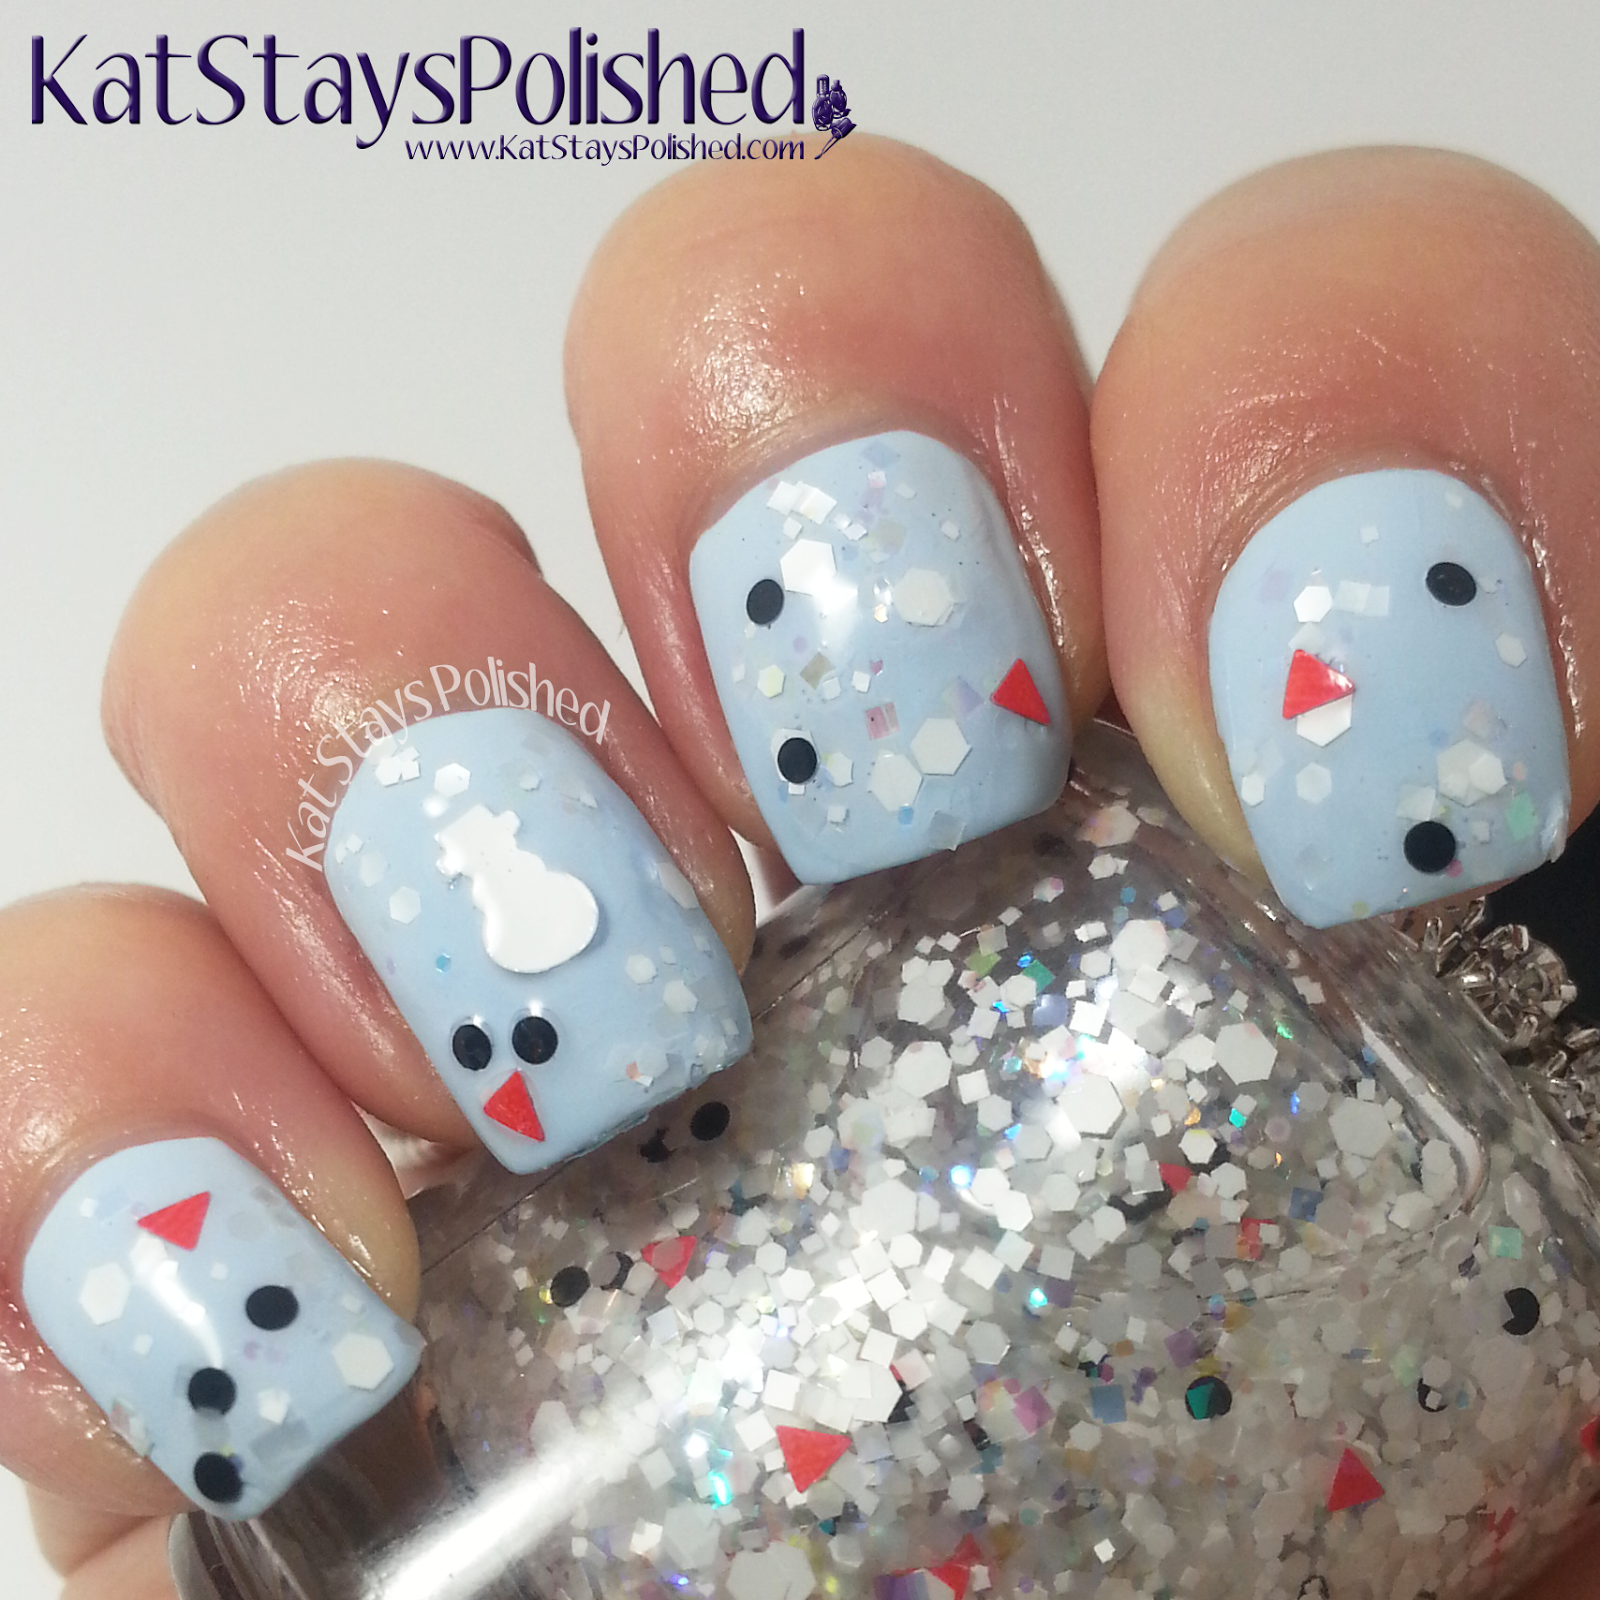 ellagee Winter Magic 2014 Collection - Do You Wanna Build a Snowman? | Kat Stays Polished